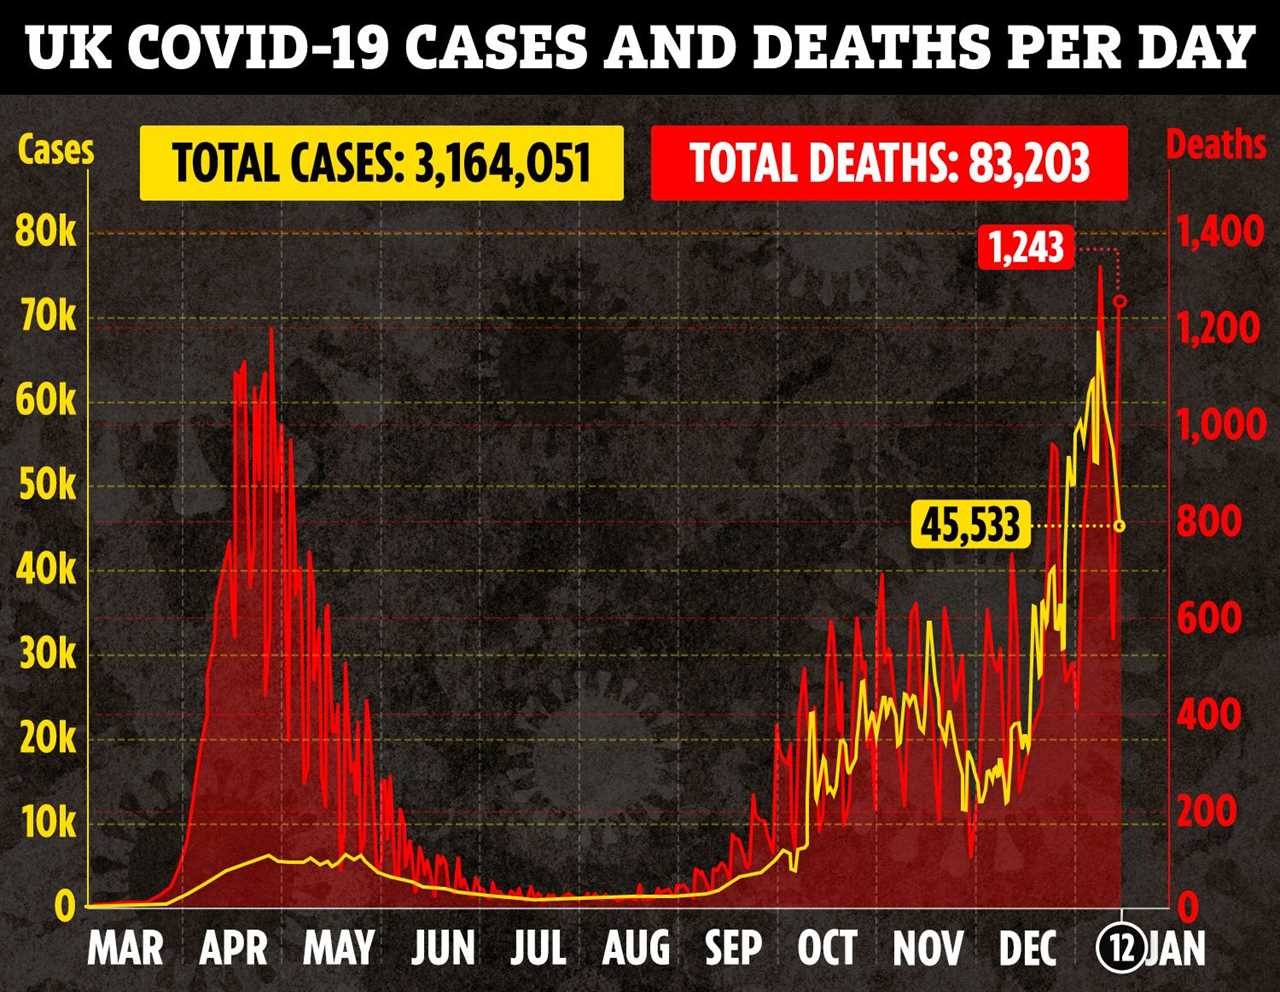 Deaths in 2020 hit 608,002 as Covid causes highest toll since 1918 flu pandemic